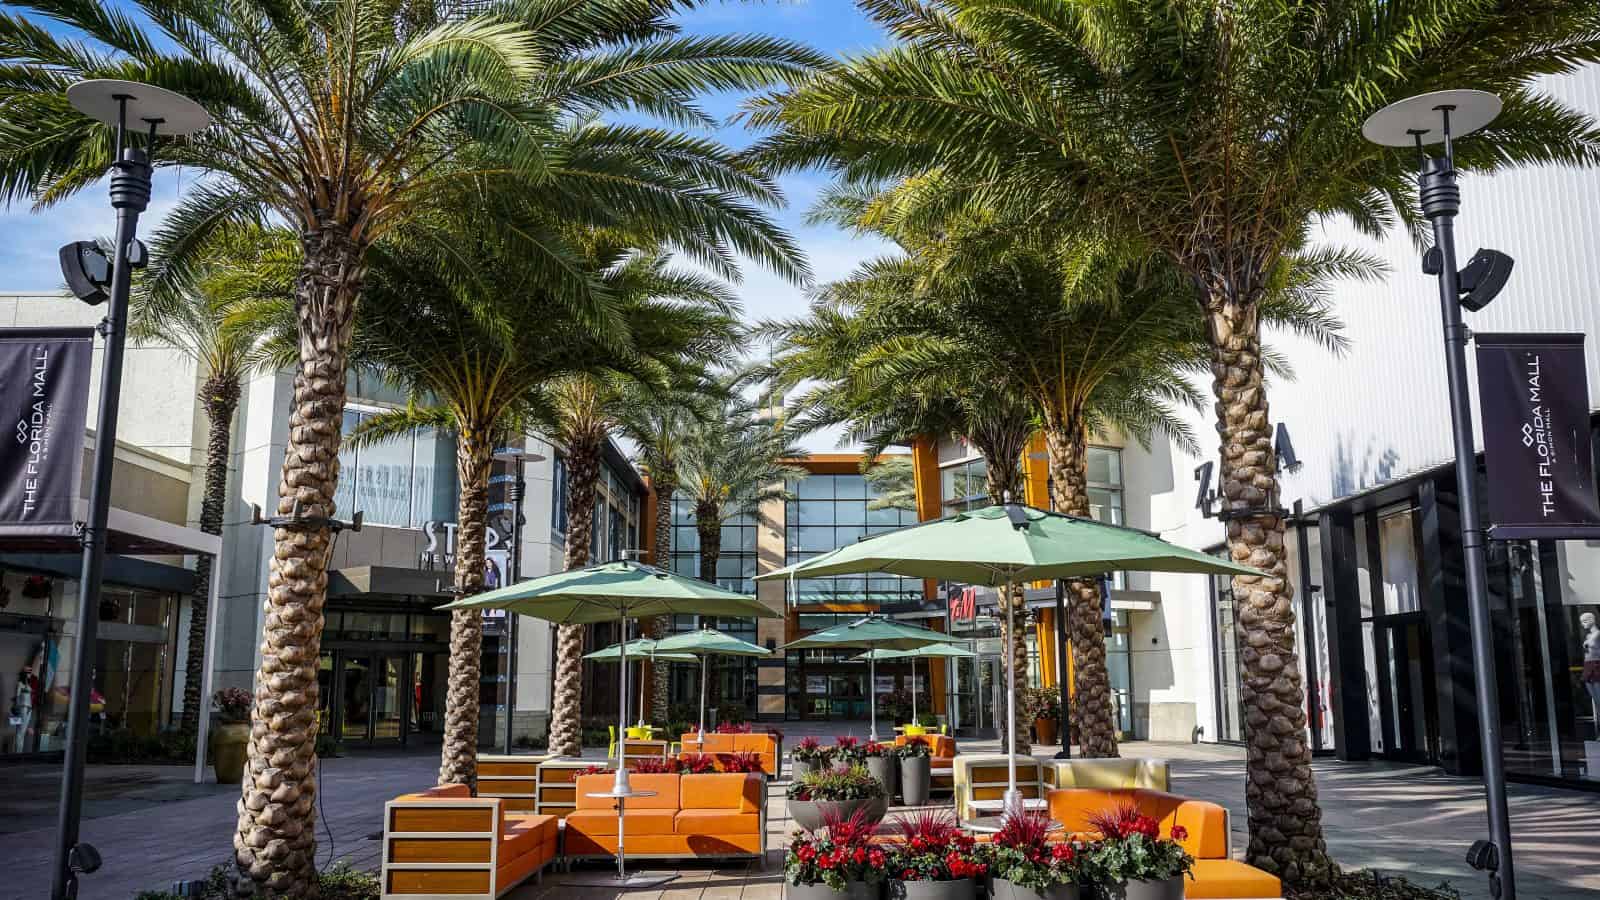 9 Best Malls in Orlando To Go Shopping - Florida Trippers